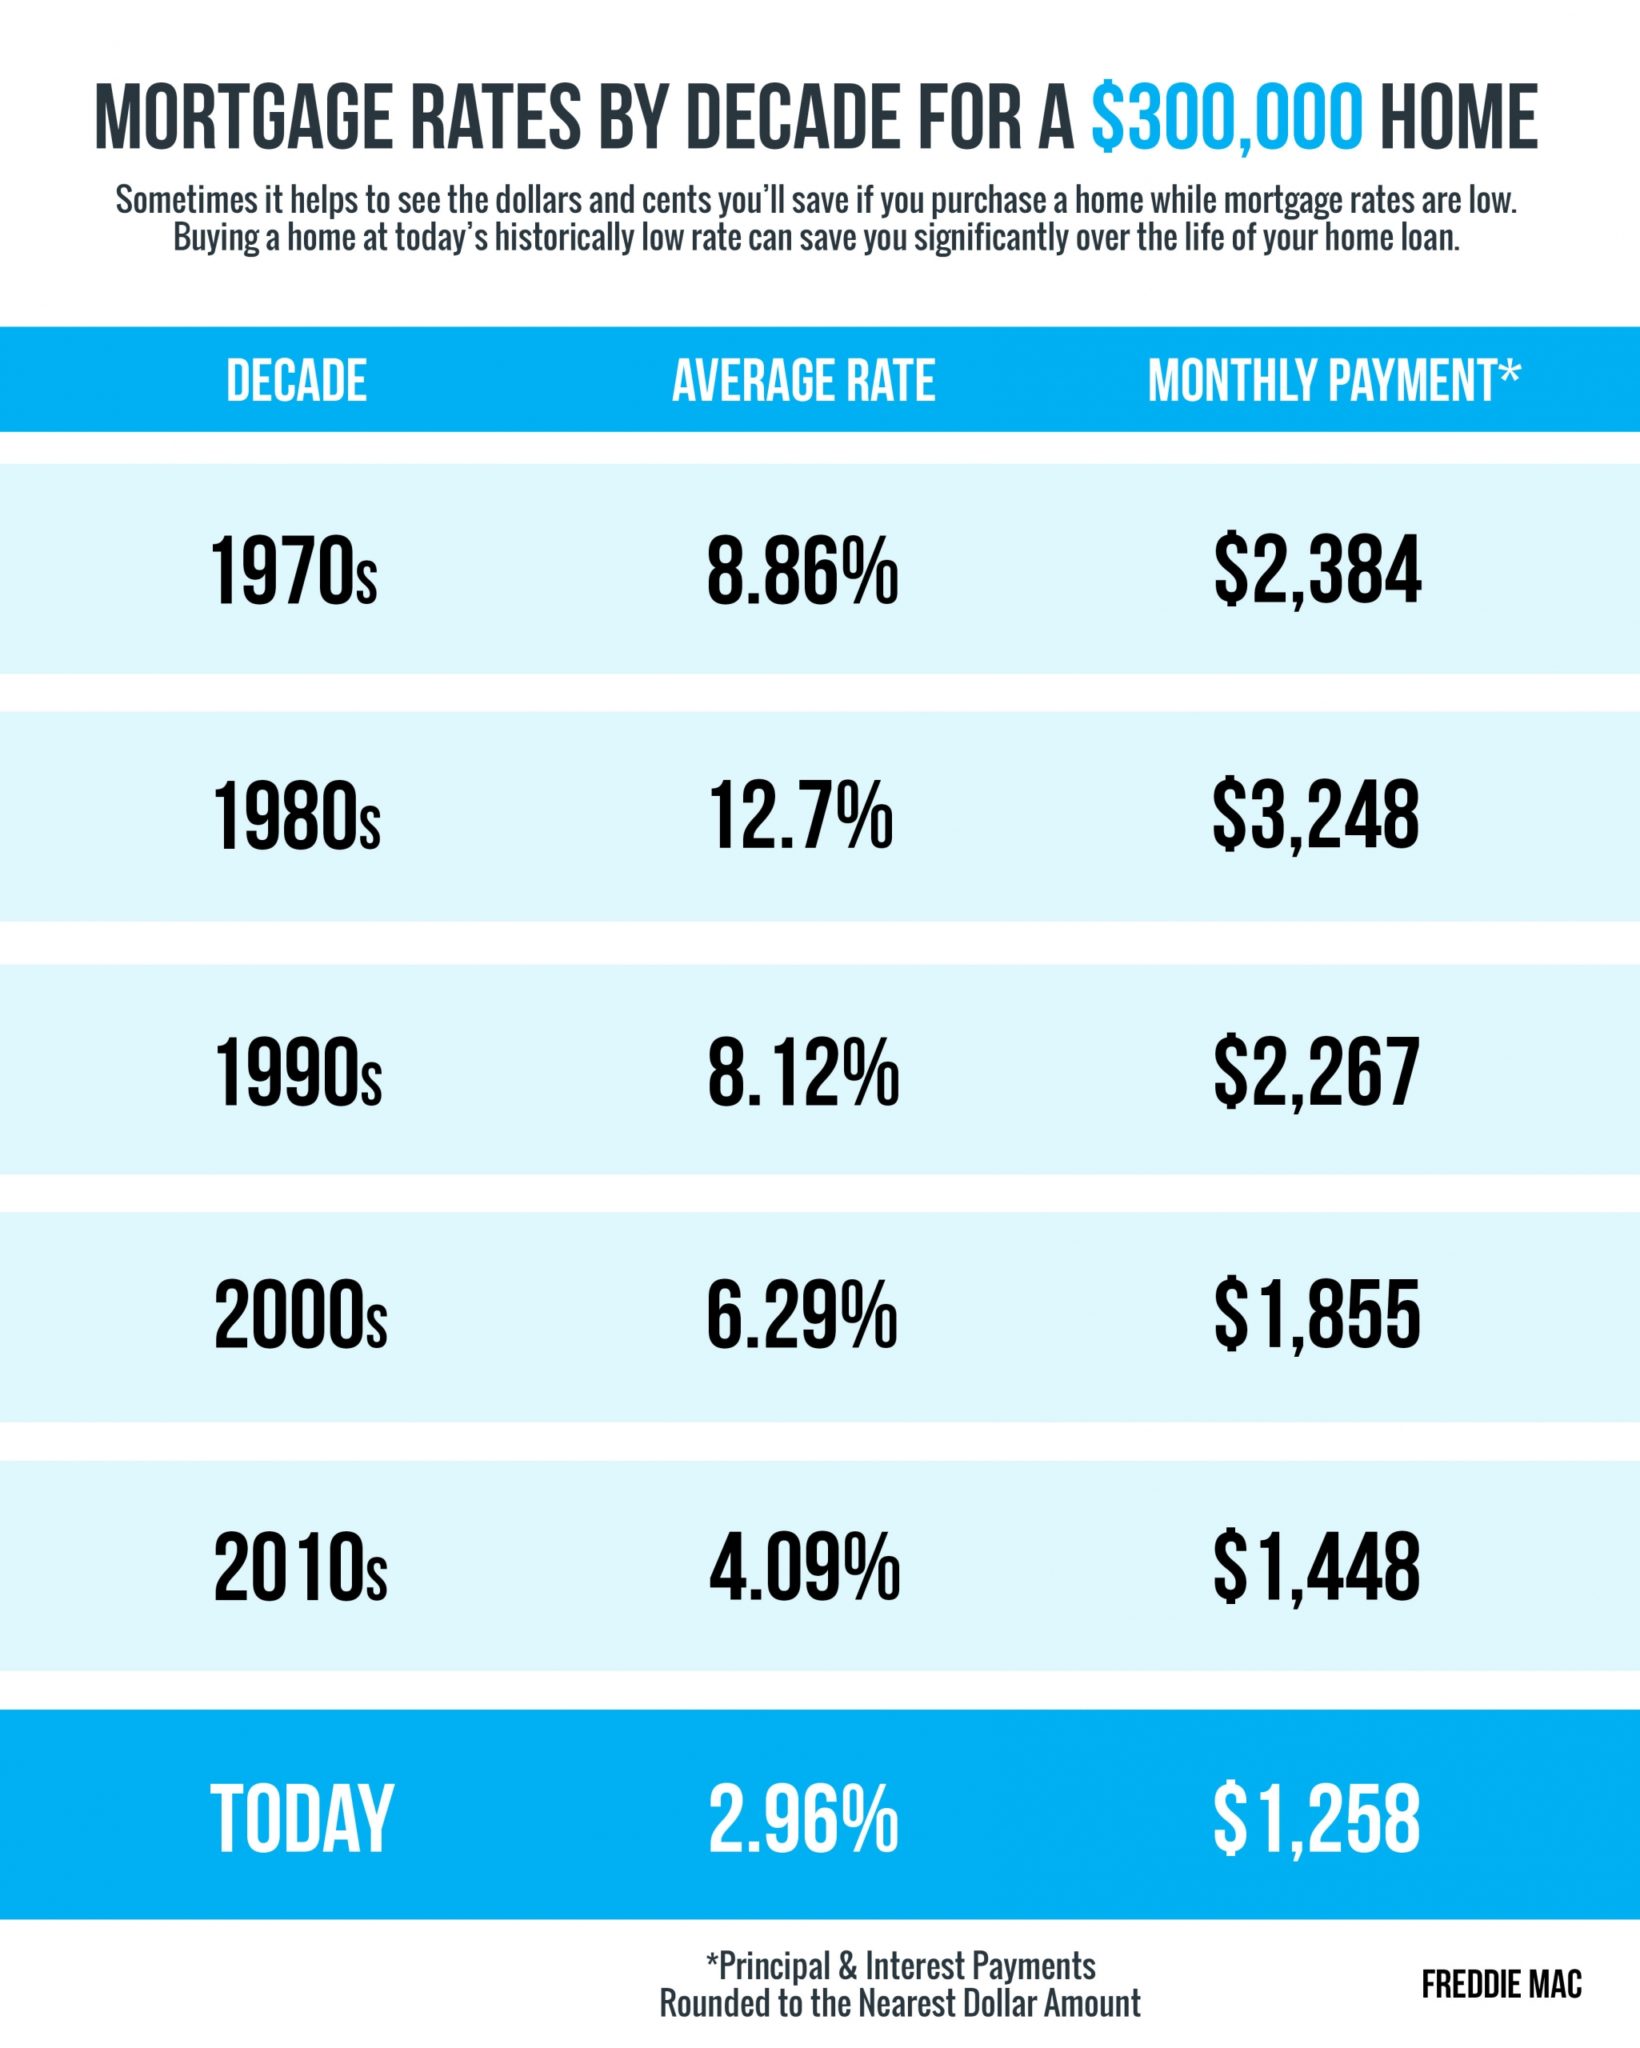 Mortgage Rates & Payments by Decade [INFOGRAPHIC]  Brian O'Neill  eXp